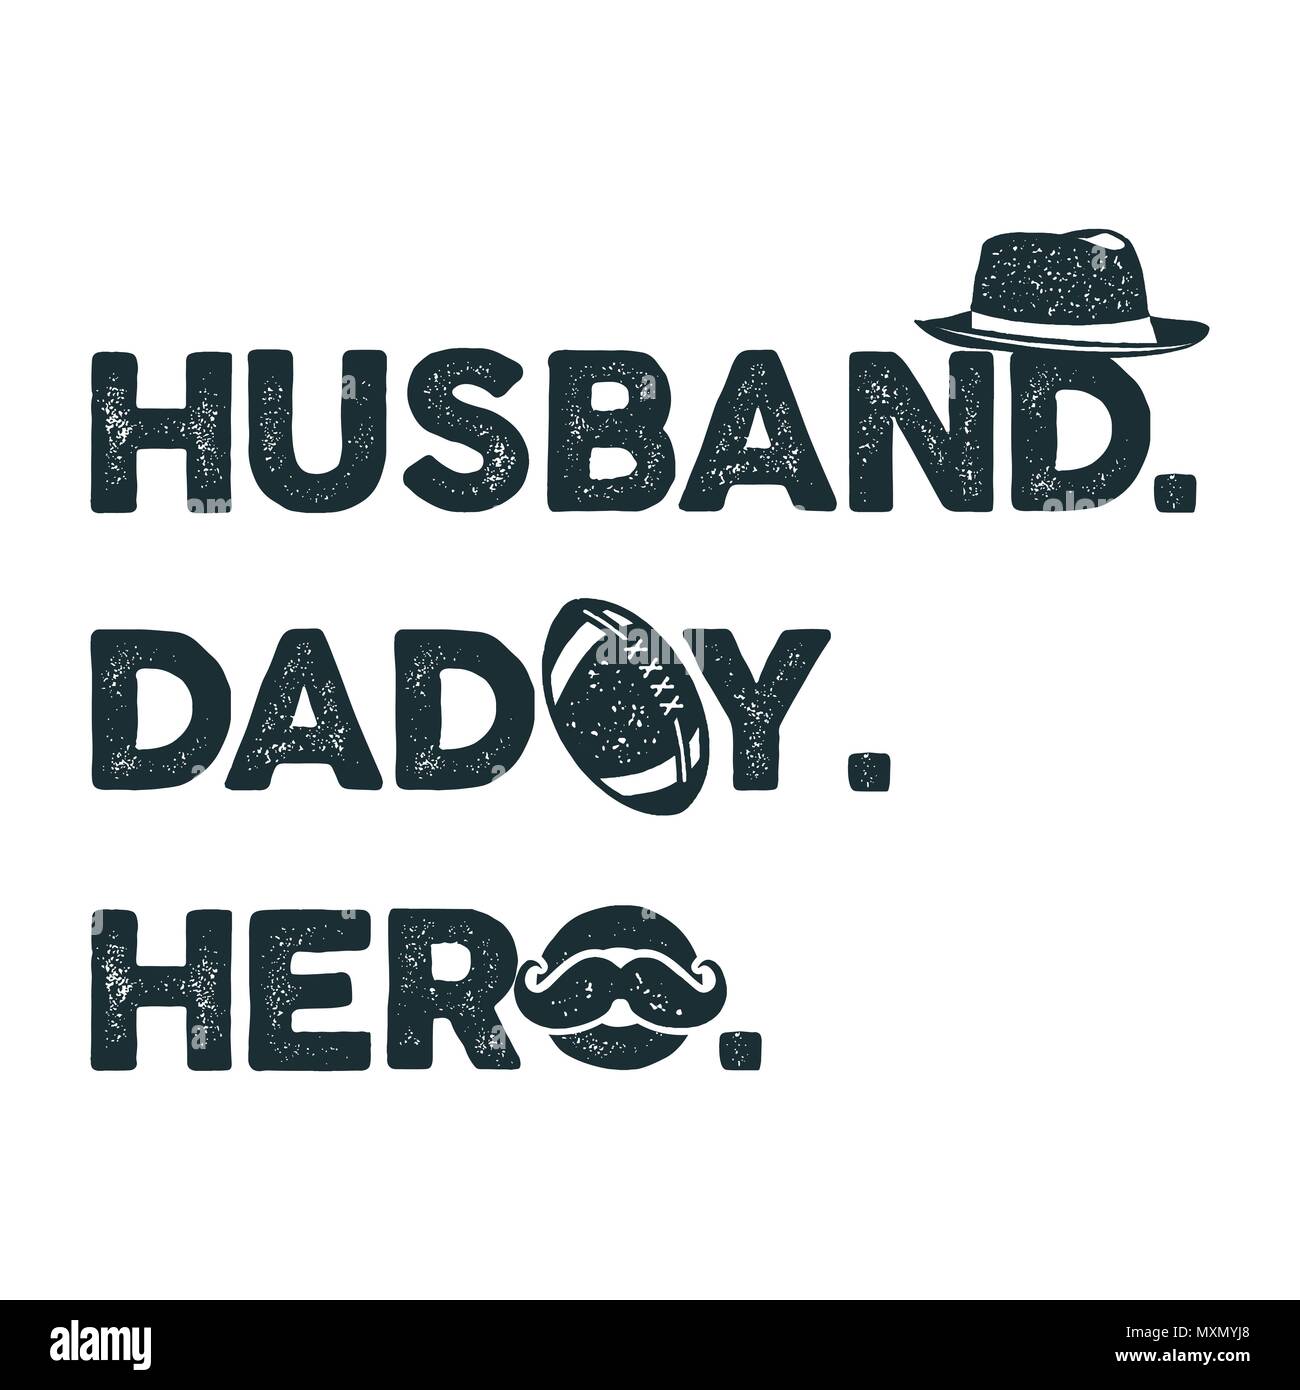 Download Husband Daddy Hero T Shirt Retro Monochrome Design Happy Fathers Day Emblem For Tees And Mugs Vintage Hand Drawn Style Funny Gift For Your Dad Or Grandpa Stock Vector Isolated On Distressed Stock